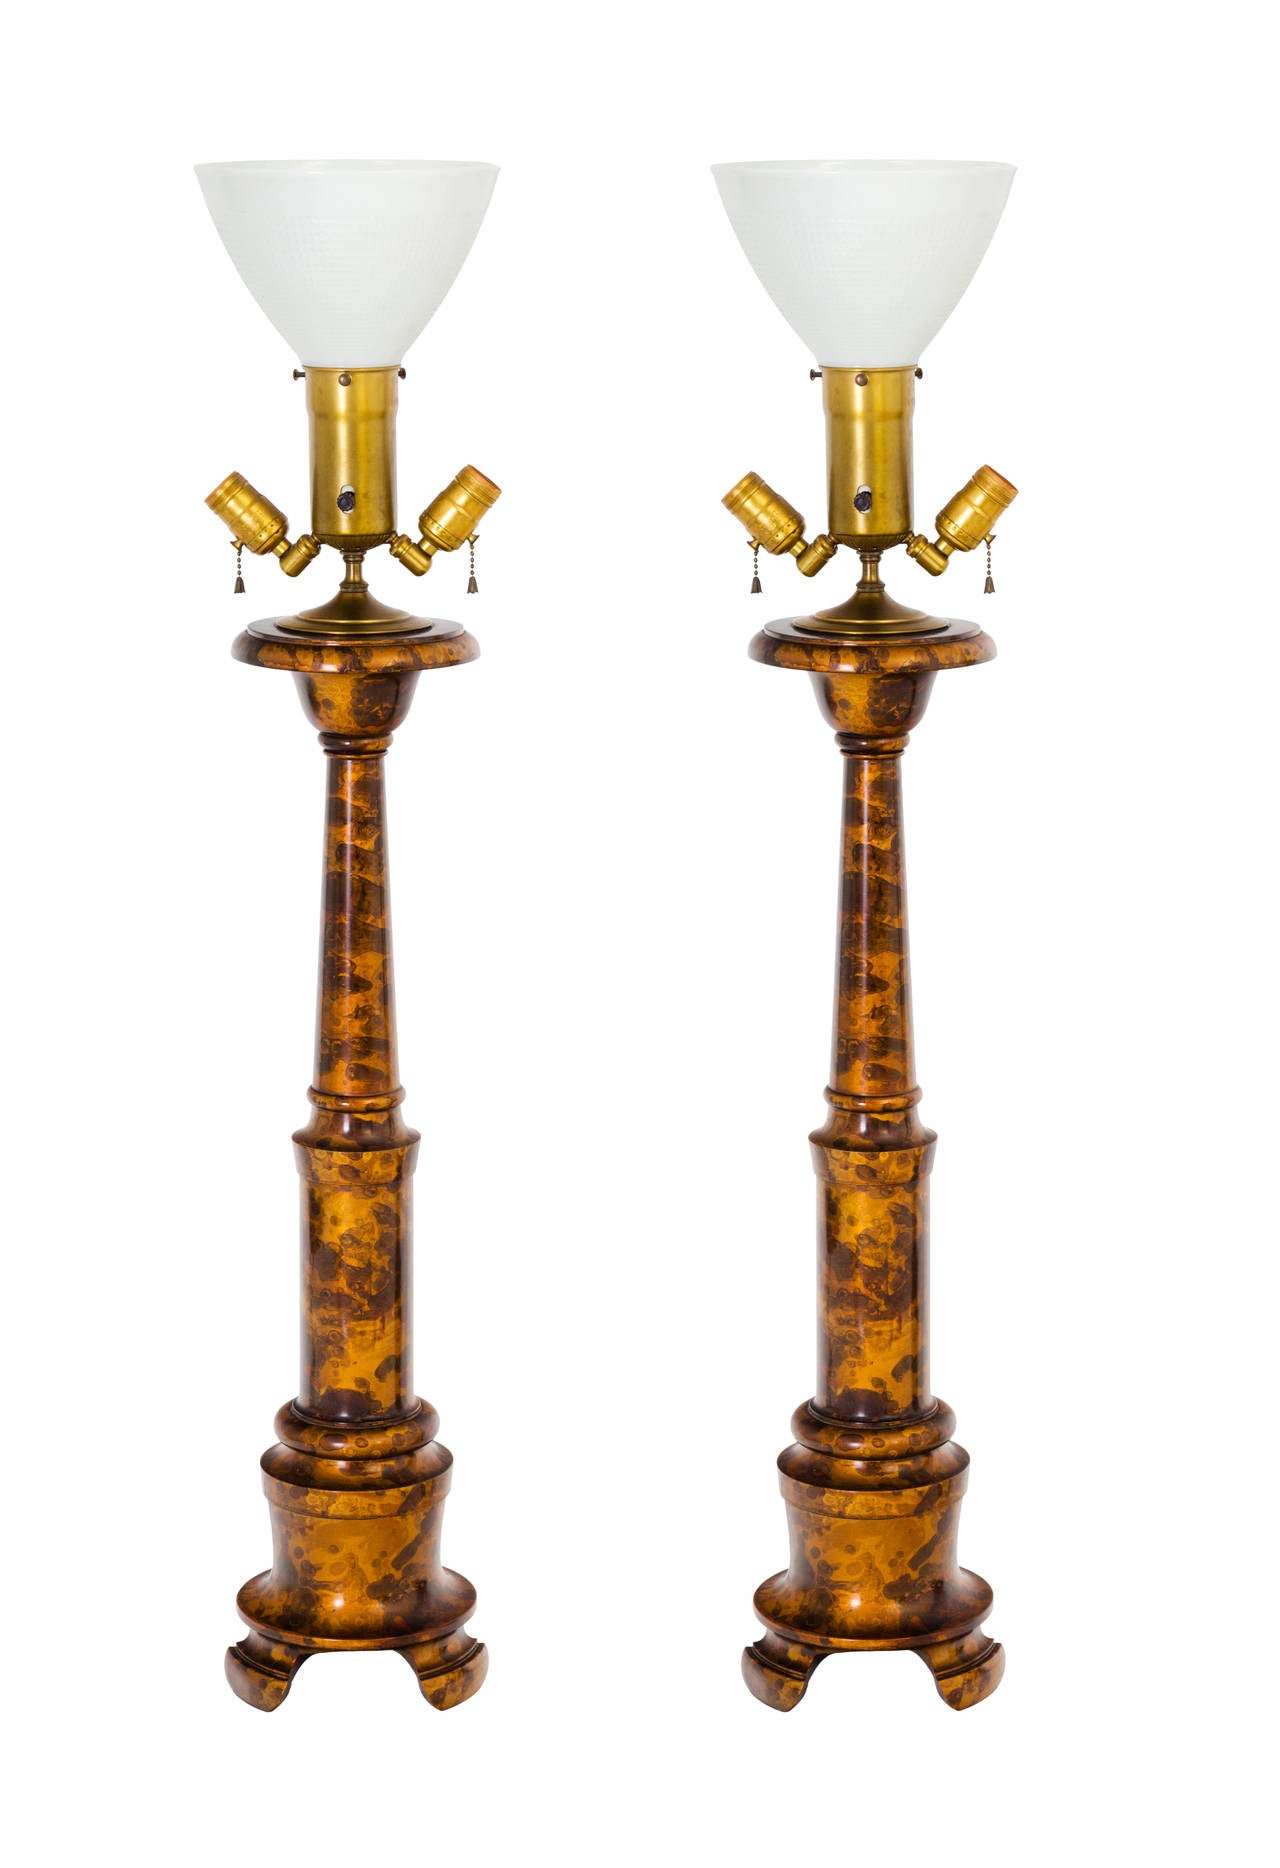 Hollywood Regency Tall Pair of Wood Baluster Form Lamps with Oil Drip Lacquered Finish, 1950s